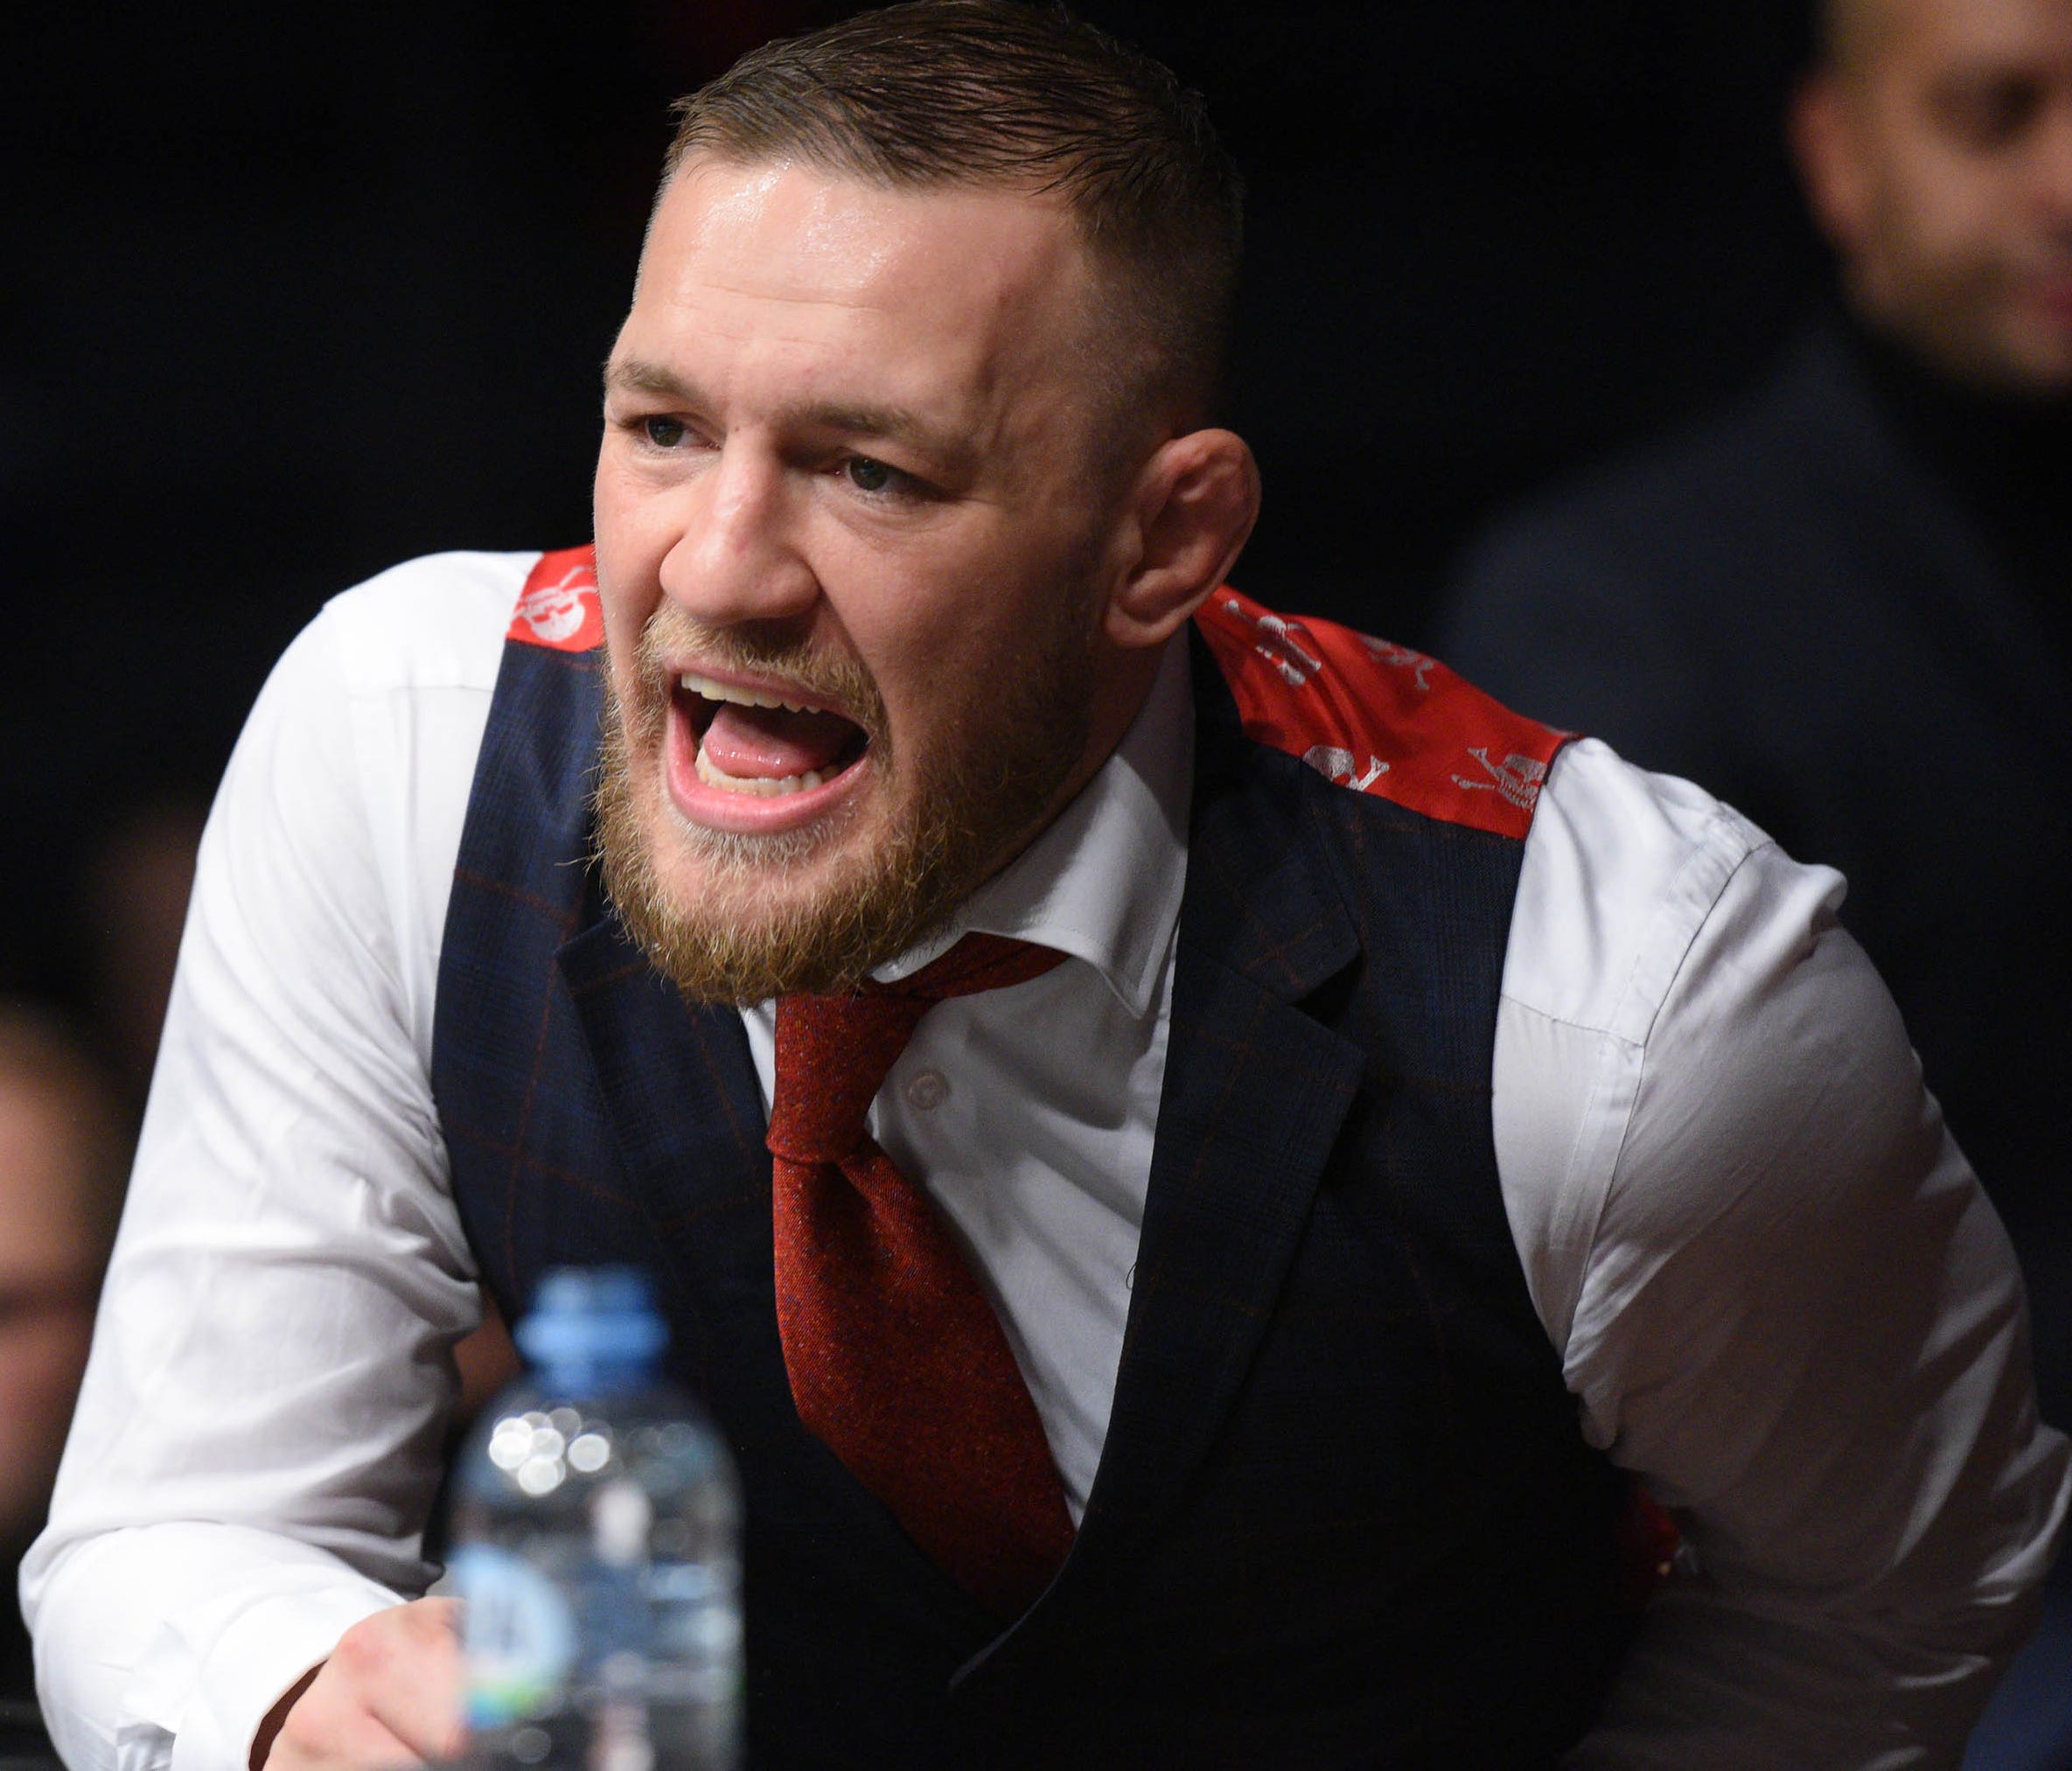 Conor McGregor and members of his entourage attacked a bus and left fighter Michael Chiesa injured, UFC President Dana White told reporters.